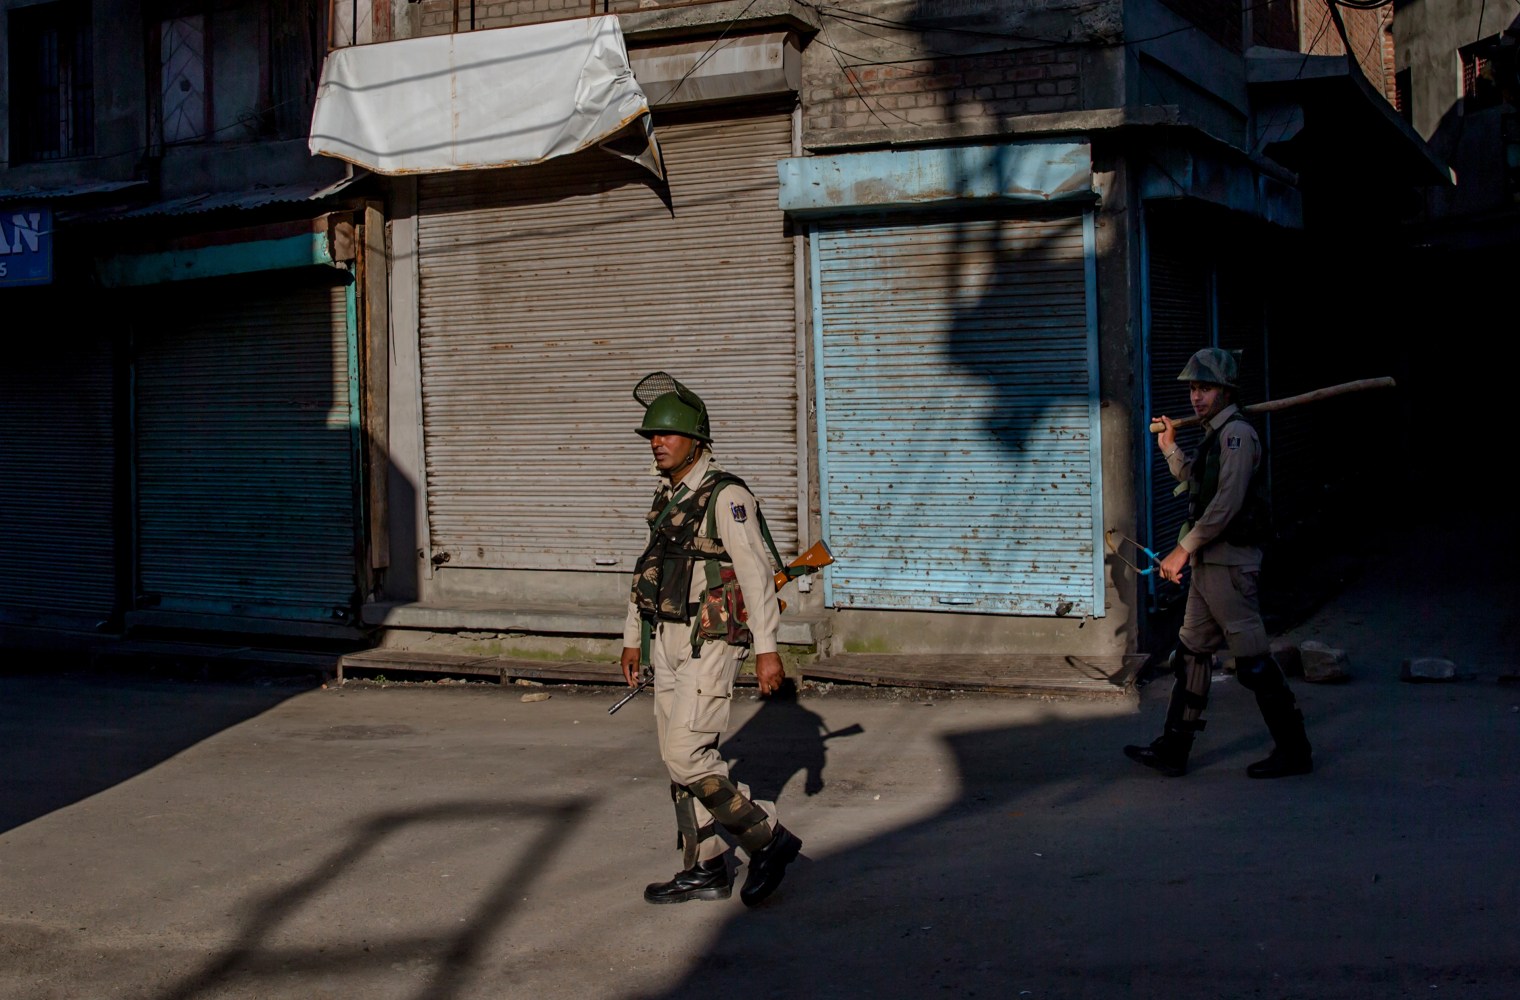 Indian paramilitary soldiers patrol during curfew in downtown area of Srinagar on June 23, 2017. Authorities imposed stringent curfew in old parts of Srinagar and did not allow Friday prayers at the Jamia Masjid to stop anti India protests. The last Friday of the fasting month of Ramadan is observed as "Al-Quds Day" and "Kashmir Day" in the region in solidarity with Palestinians and Kashmiris.